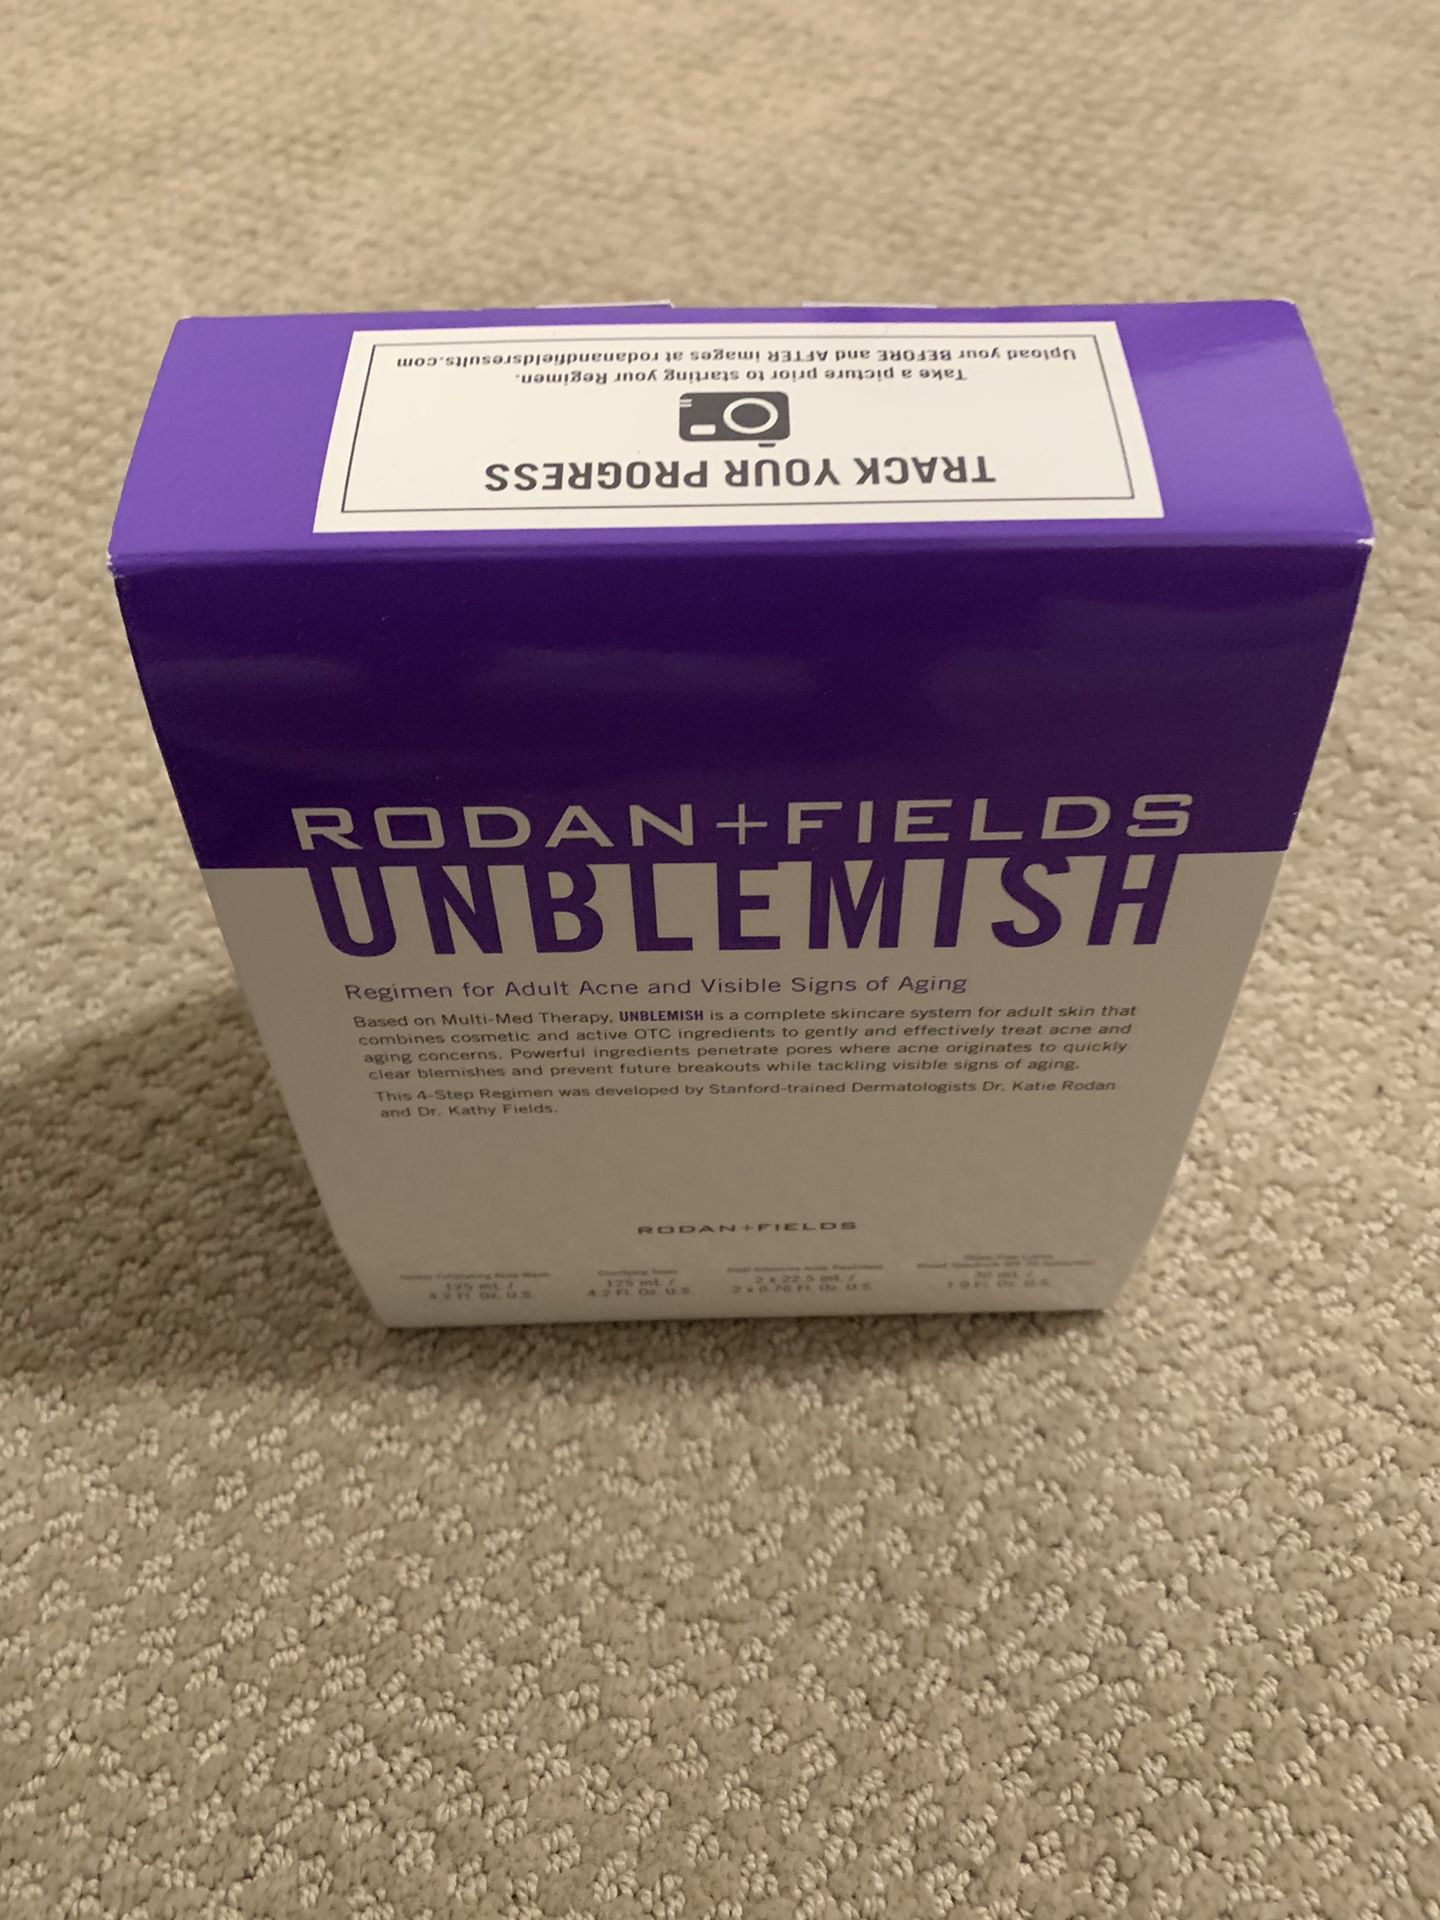 Unblemish skincare from Rodan and Fields